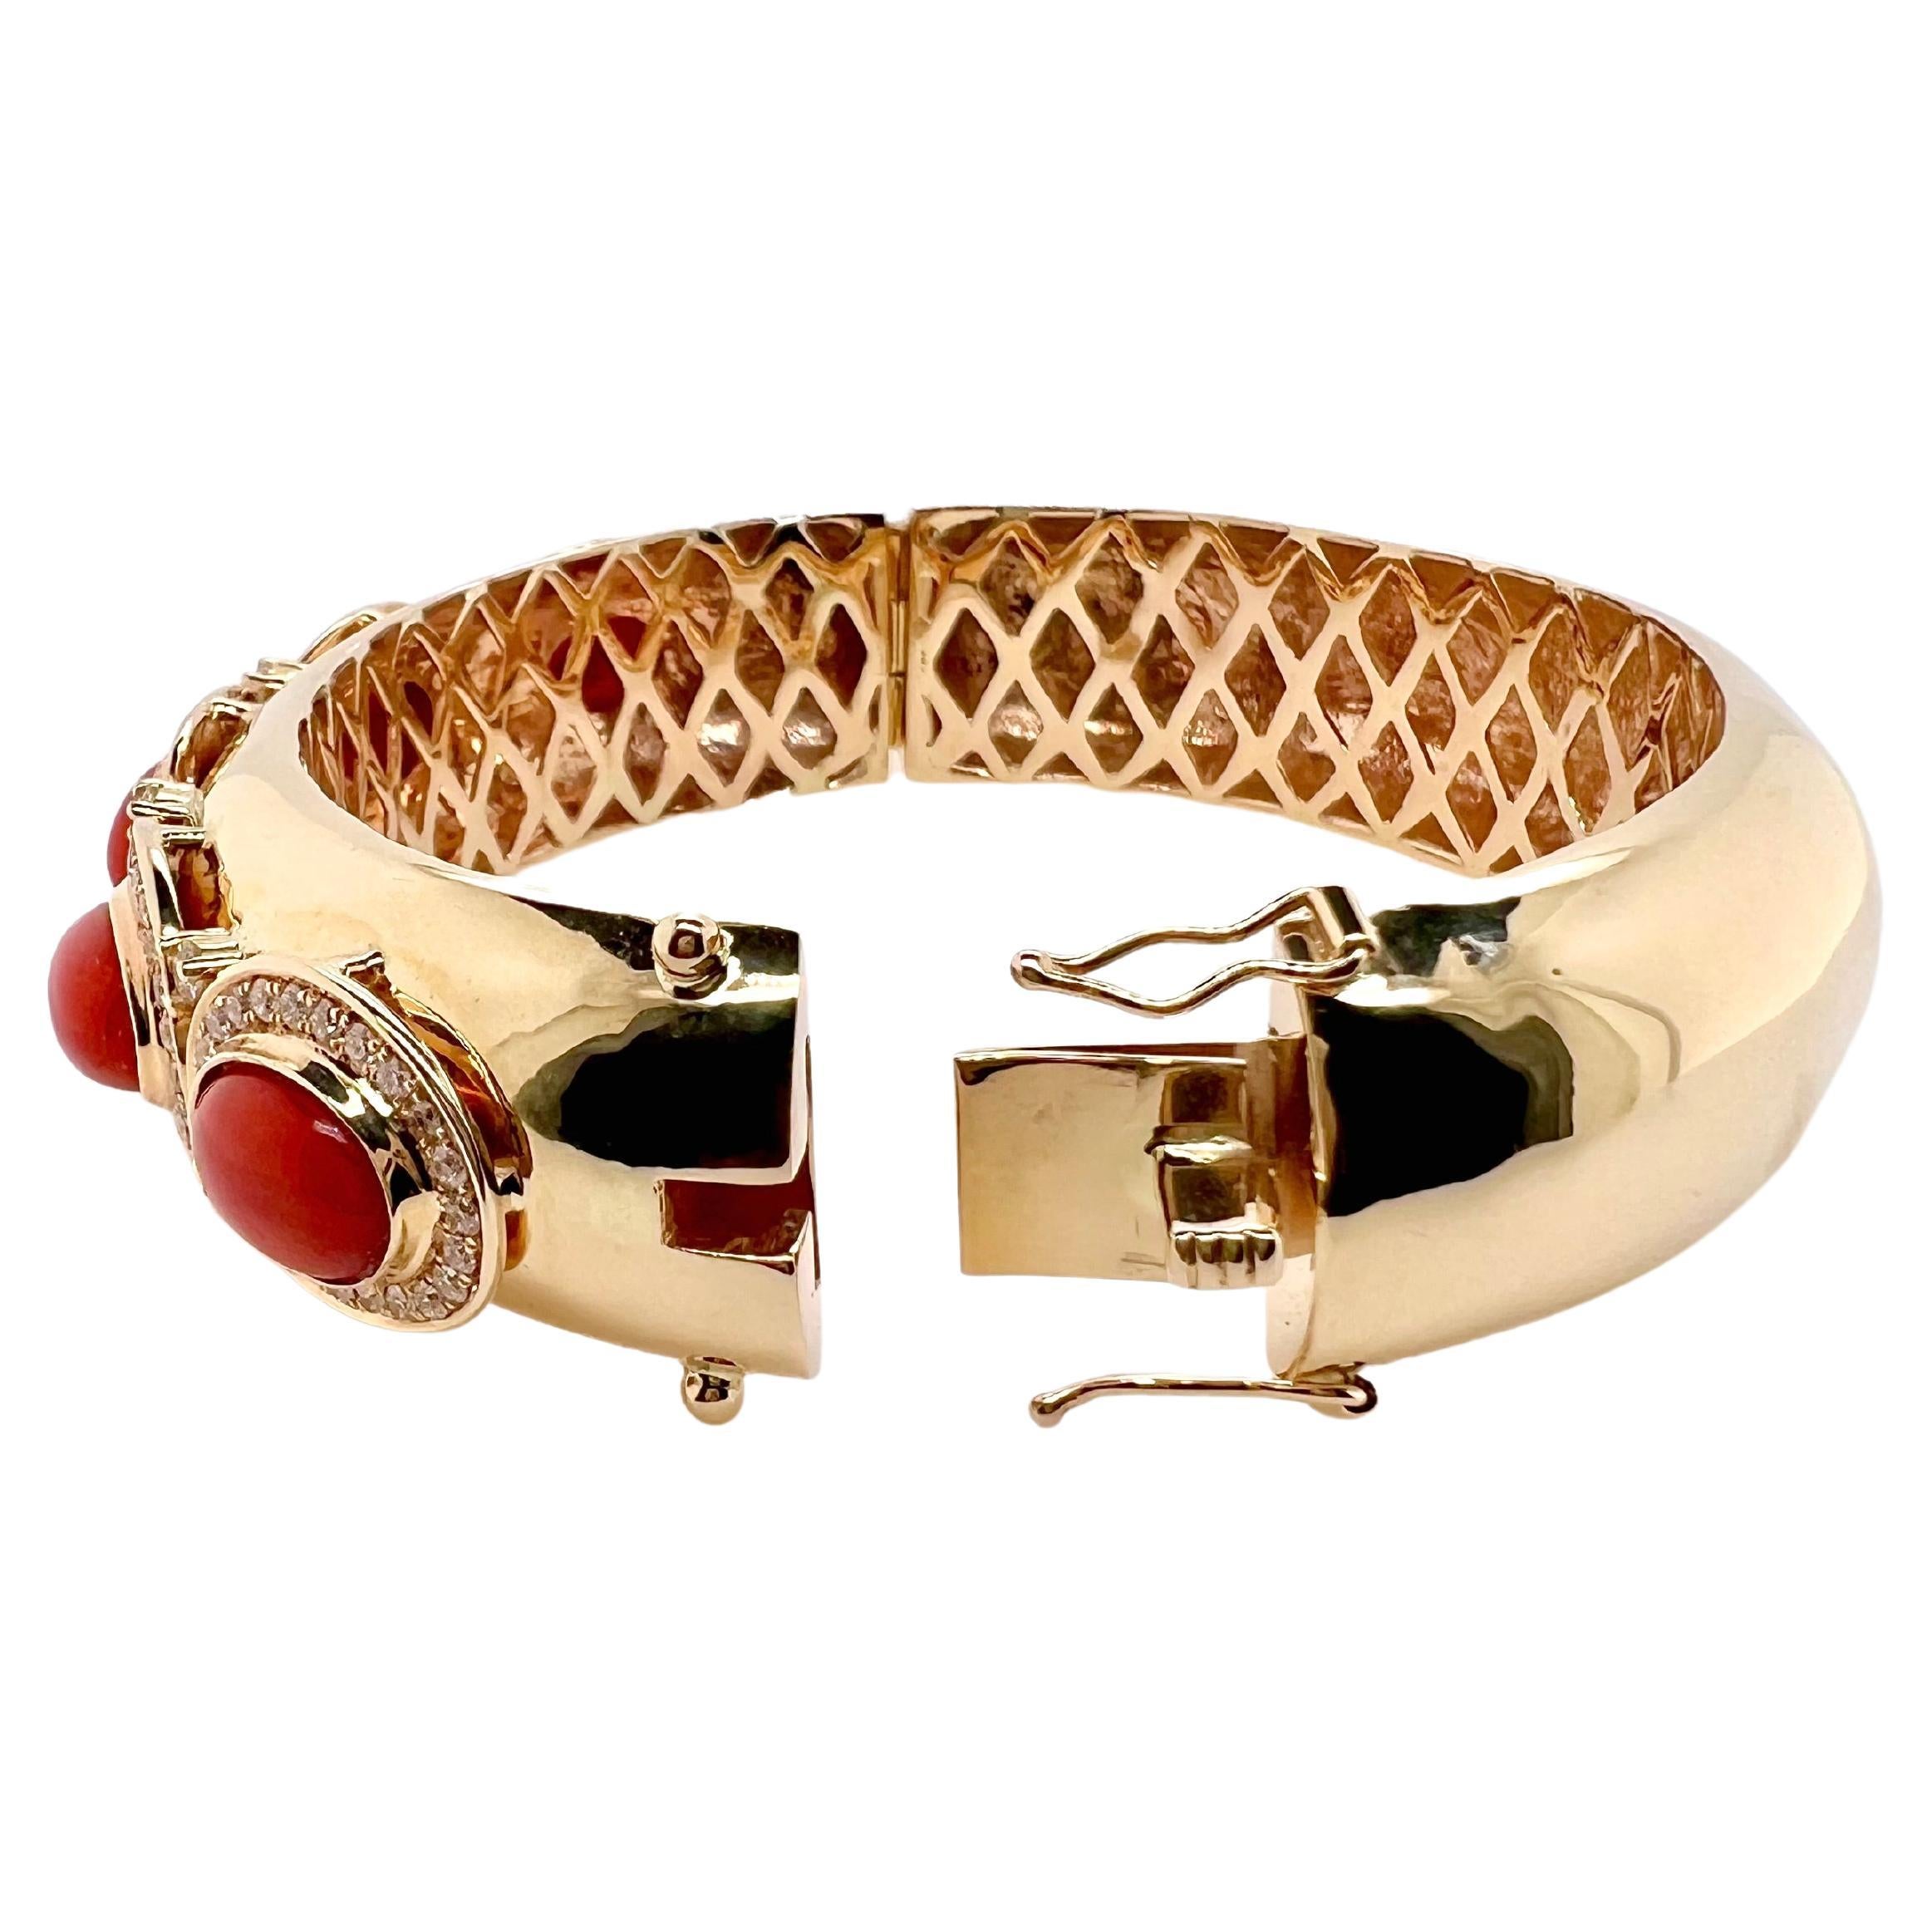 This stunning bangle is handmade with meticulous details.  The coral cabochons are bezel set with round brilliant diamonds surrounding it.  The vibrant coral stands out against the yellow gold and the bangle has an underneath gallery to finish off